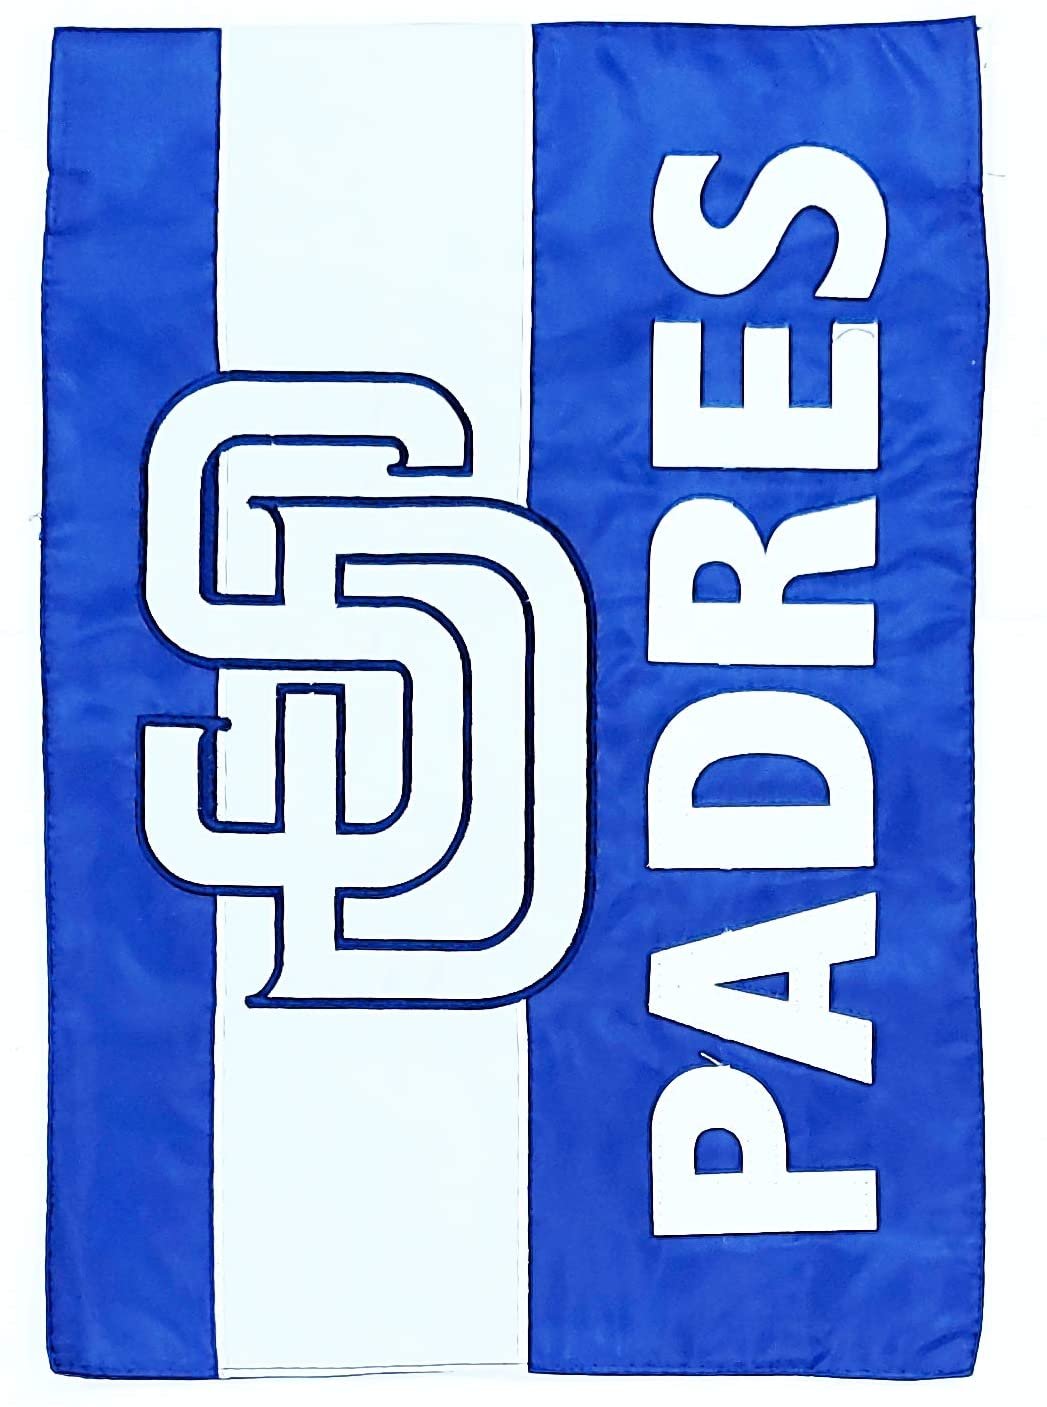 San Diego Padres Premium Garden Flag Banner, Double Sided, Embroidered, 13x18 Inch